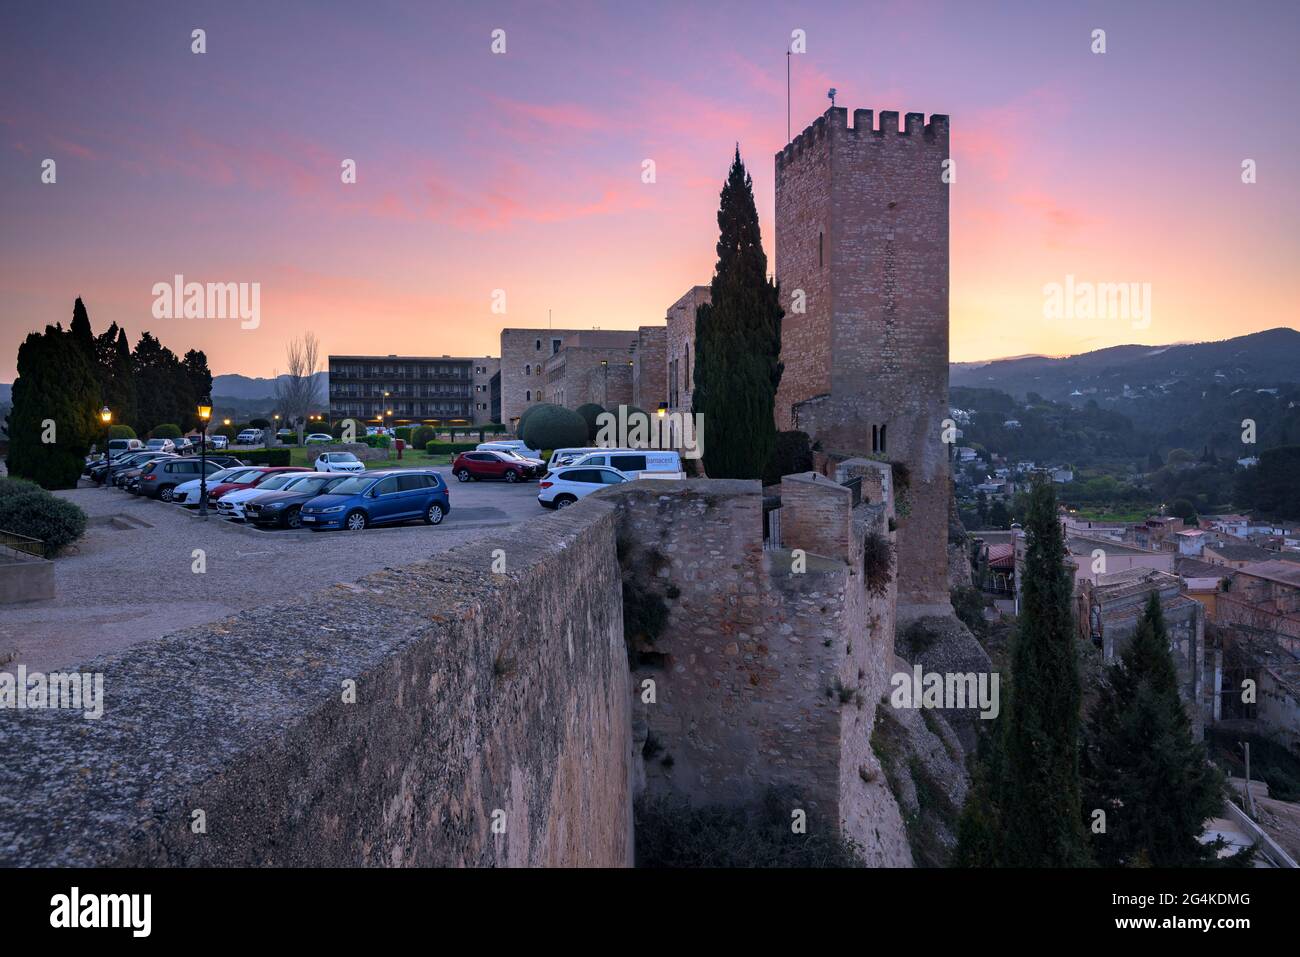 Sunrise in the city of Tortosa, seen from the viewpoint of the Suda castle, currently a hotel (Tortosa, Catalonia, Spain) ESP: Amanecer en Tortosa Stock Photo